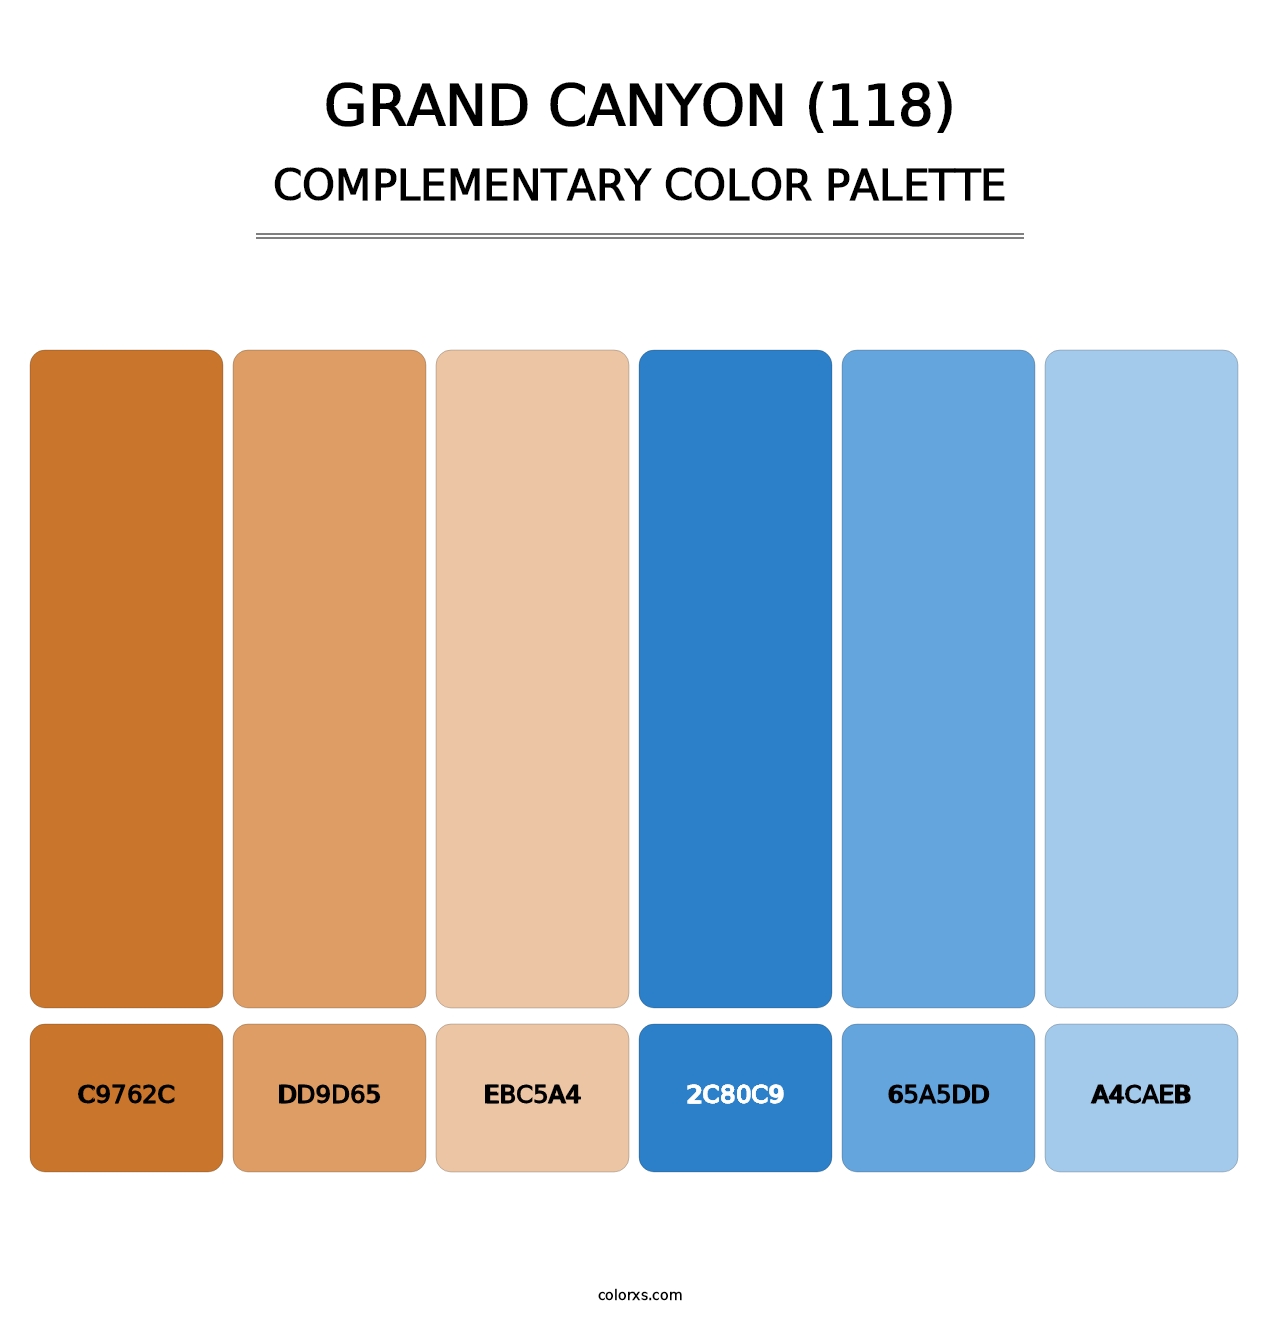 Grand Canyon (118) - Complementary Color Palette